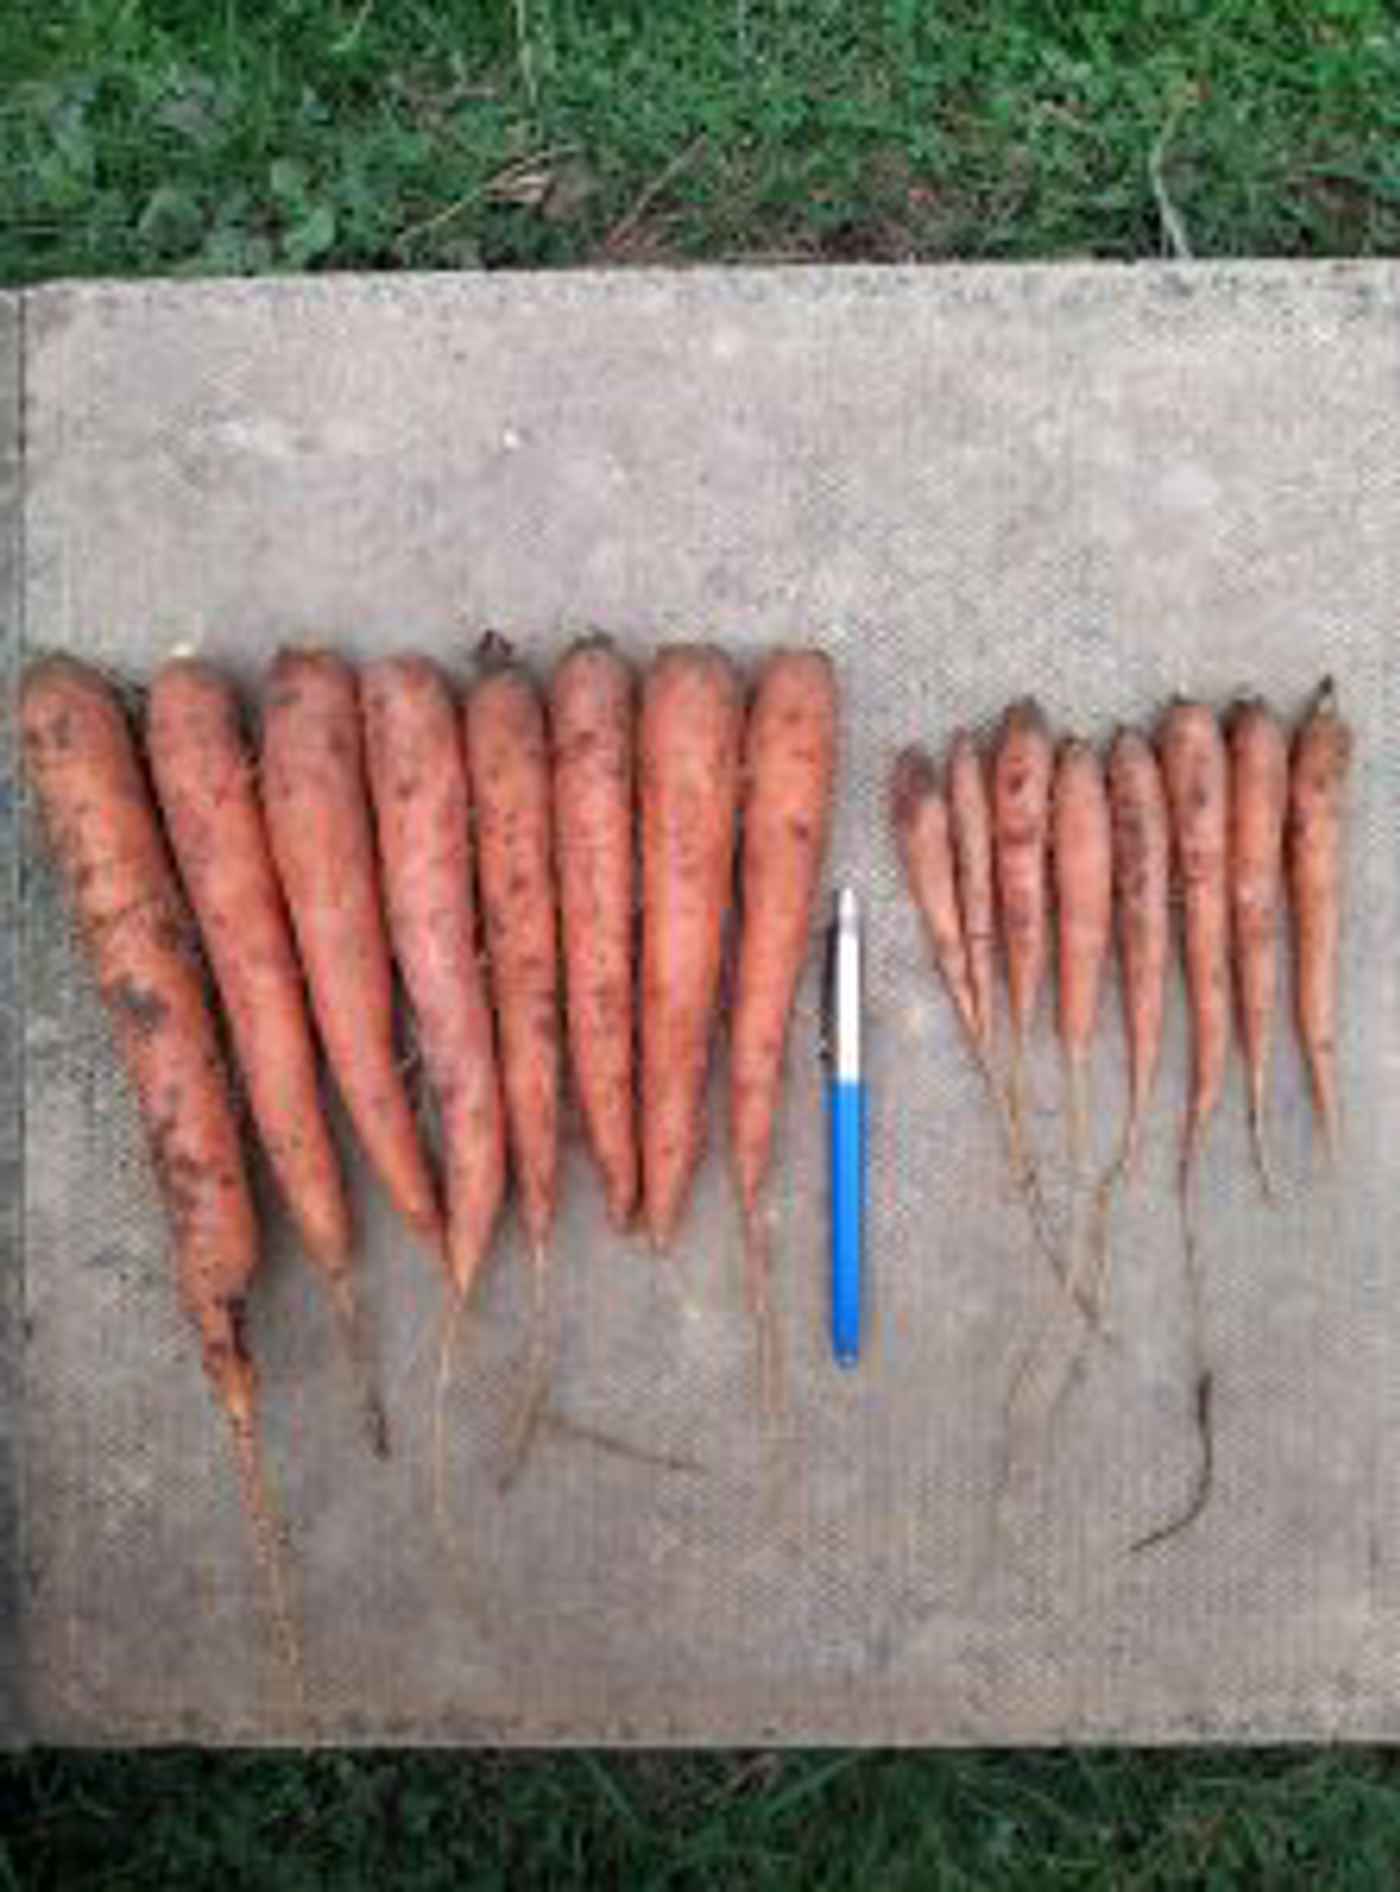 Carrots Treated With Agrii-Start Release significantly larger than those under control conditions at Agrii trials